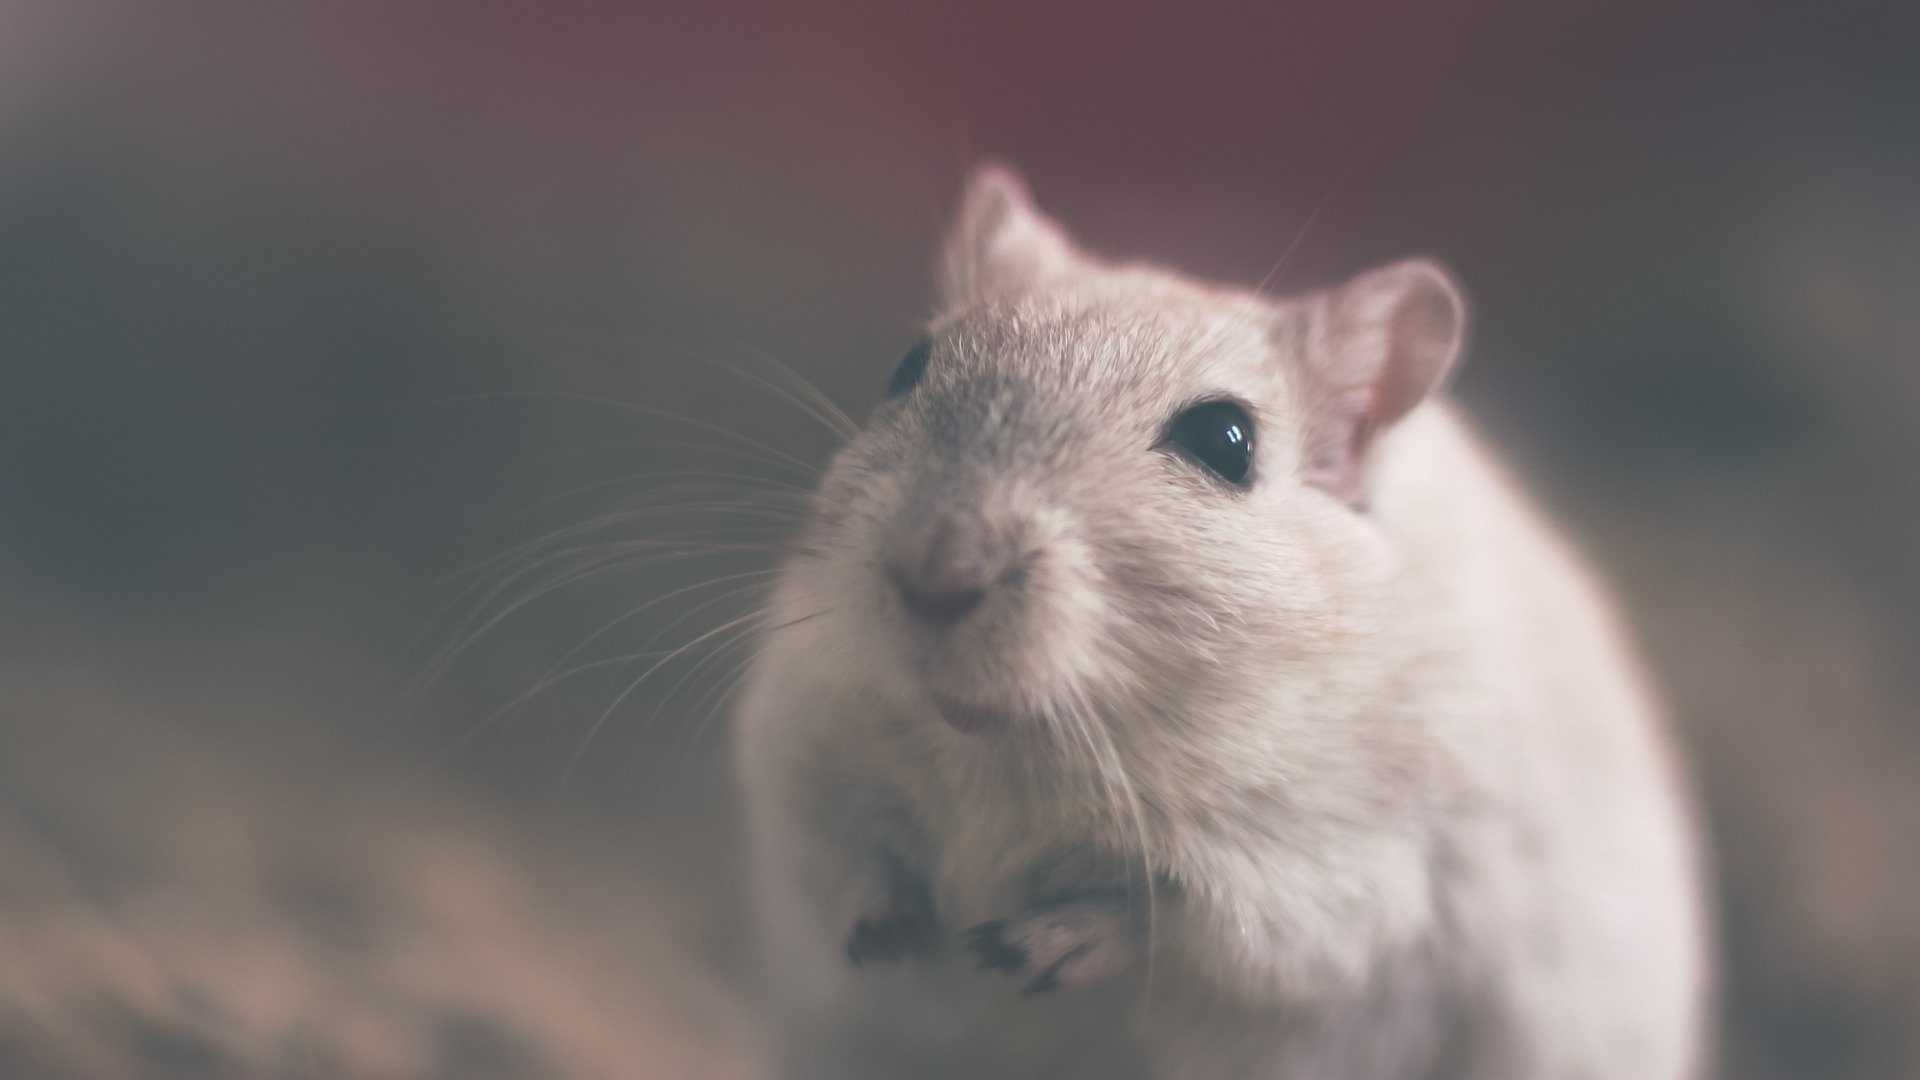 Di-isononyl phthalate disrupts pregnancy in mice, study finds